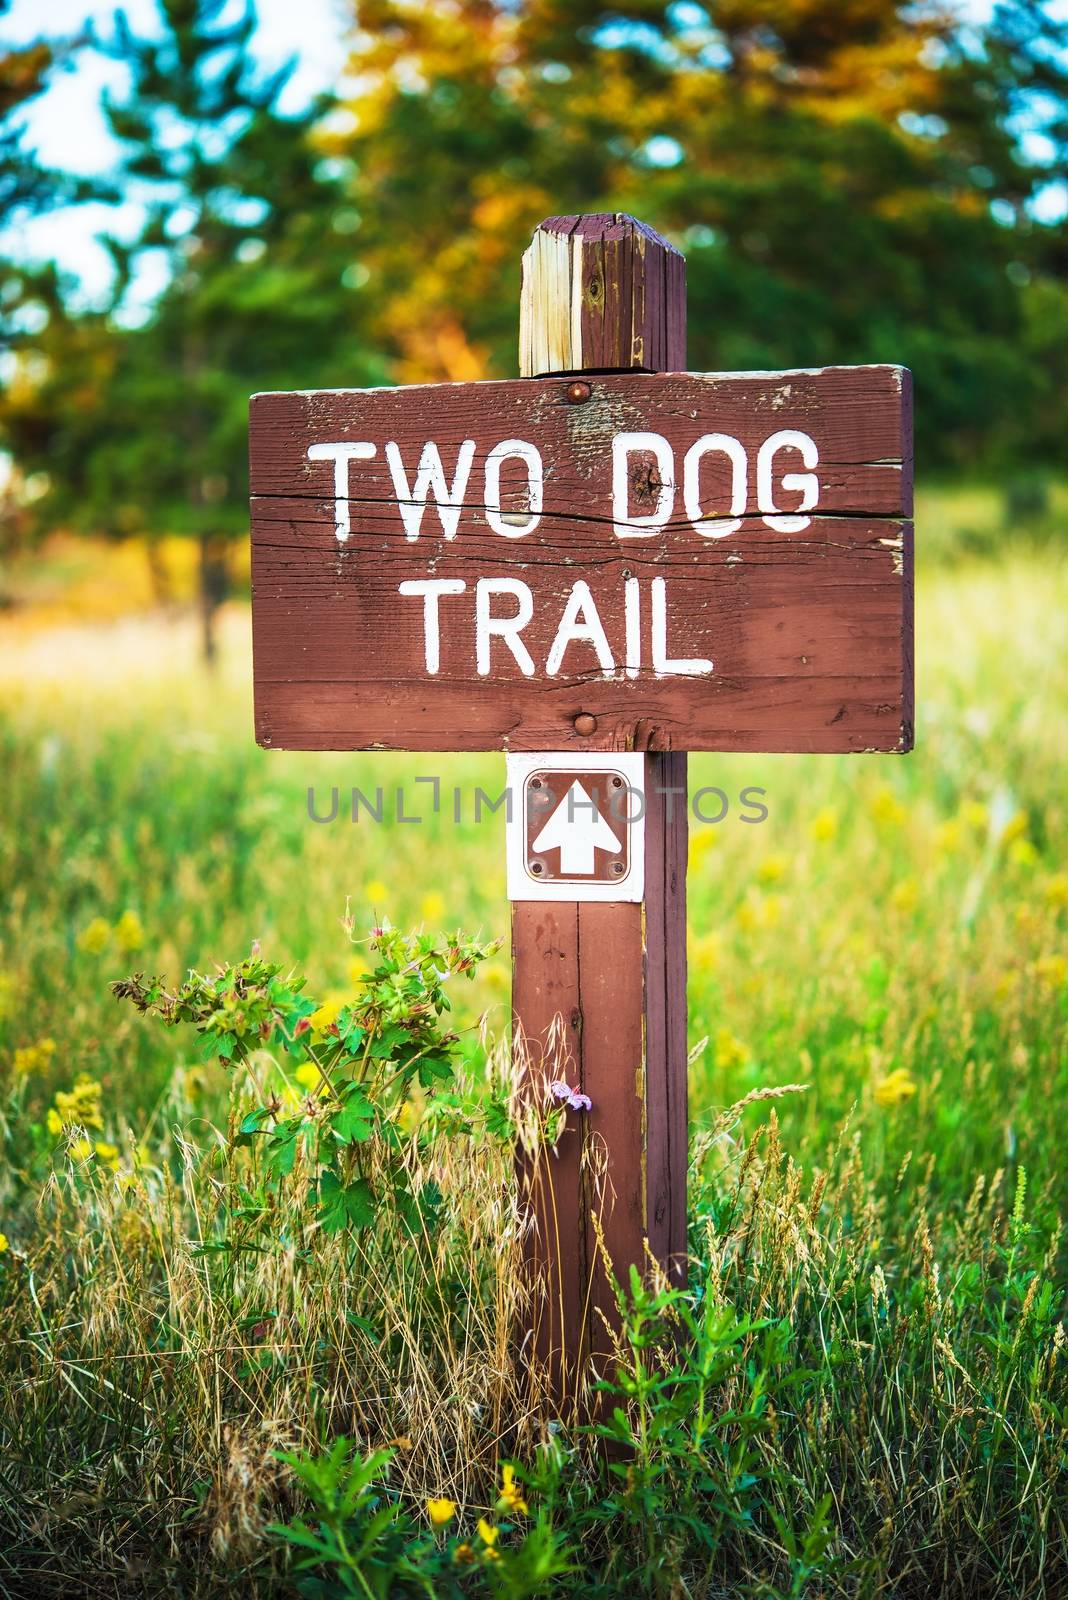 Mountain Trail Wooden Sign, Two Dog Trail Arrow. Colorado, United States.